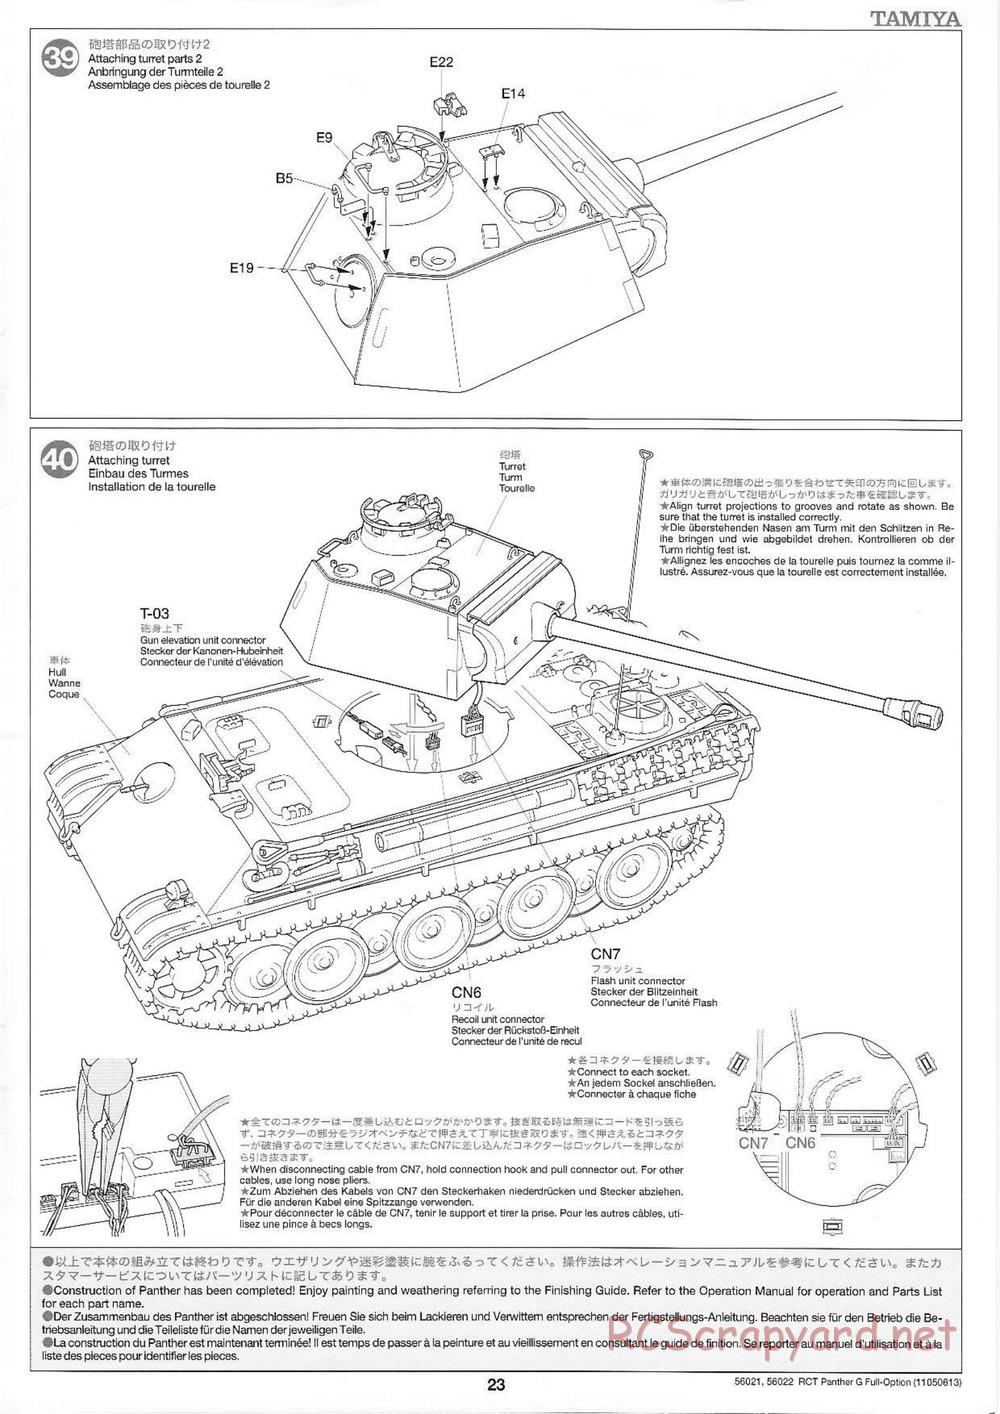 Tamiya - Panther Type G - 1/16 Scale Chassis - Manual - Page 23